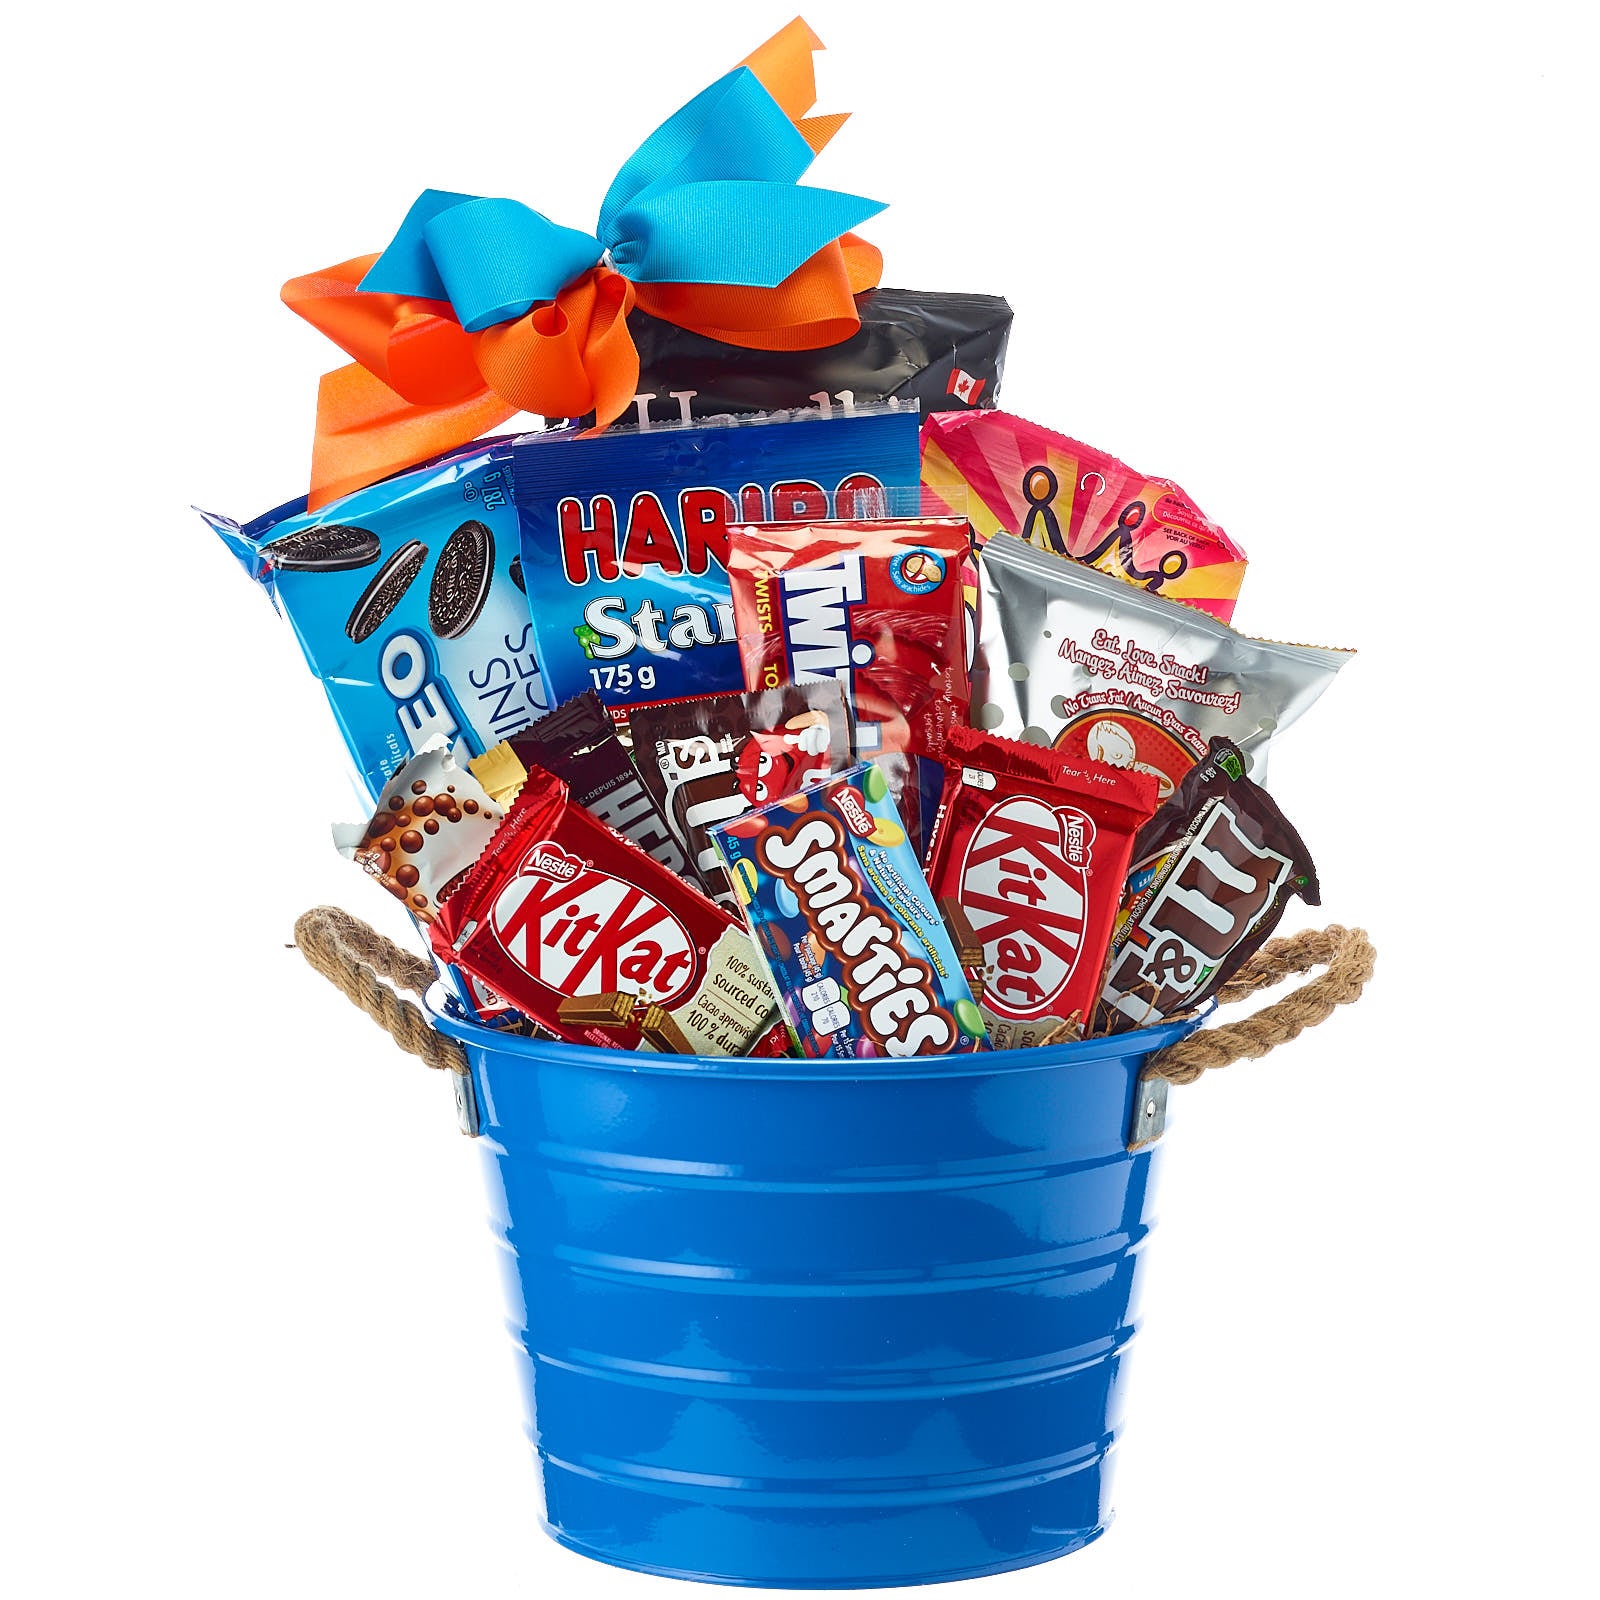 Shop Best-Selling Birthday Gifts For Teens - MY BASKETS